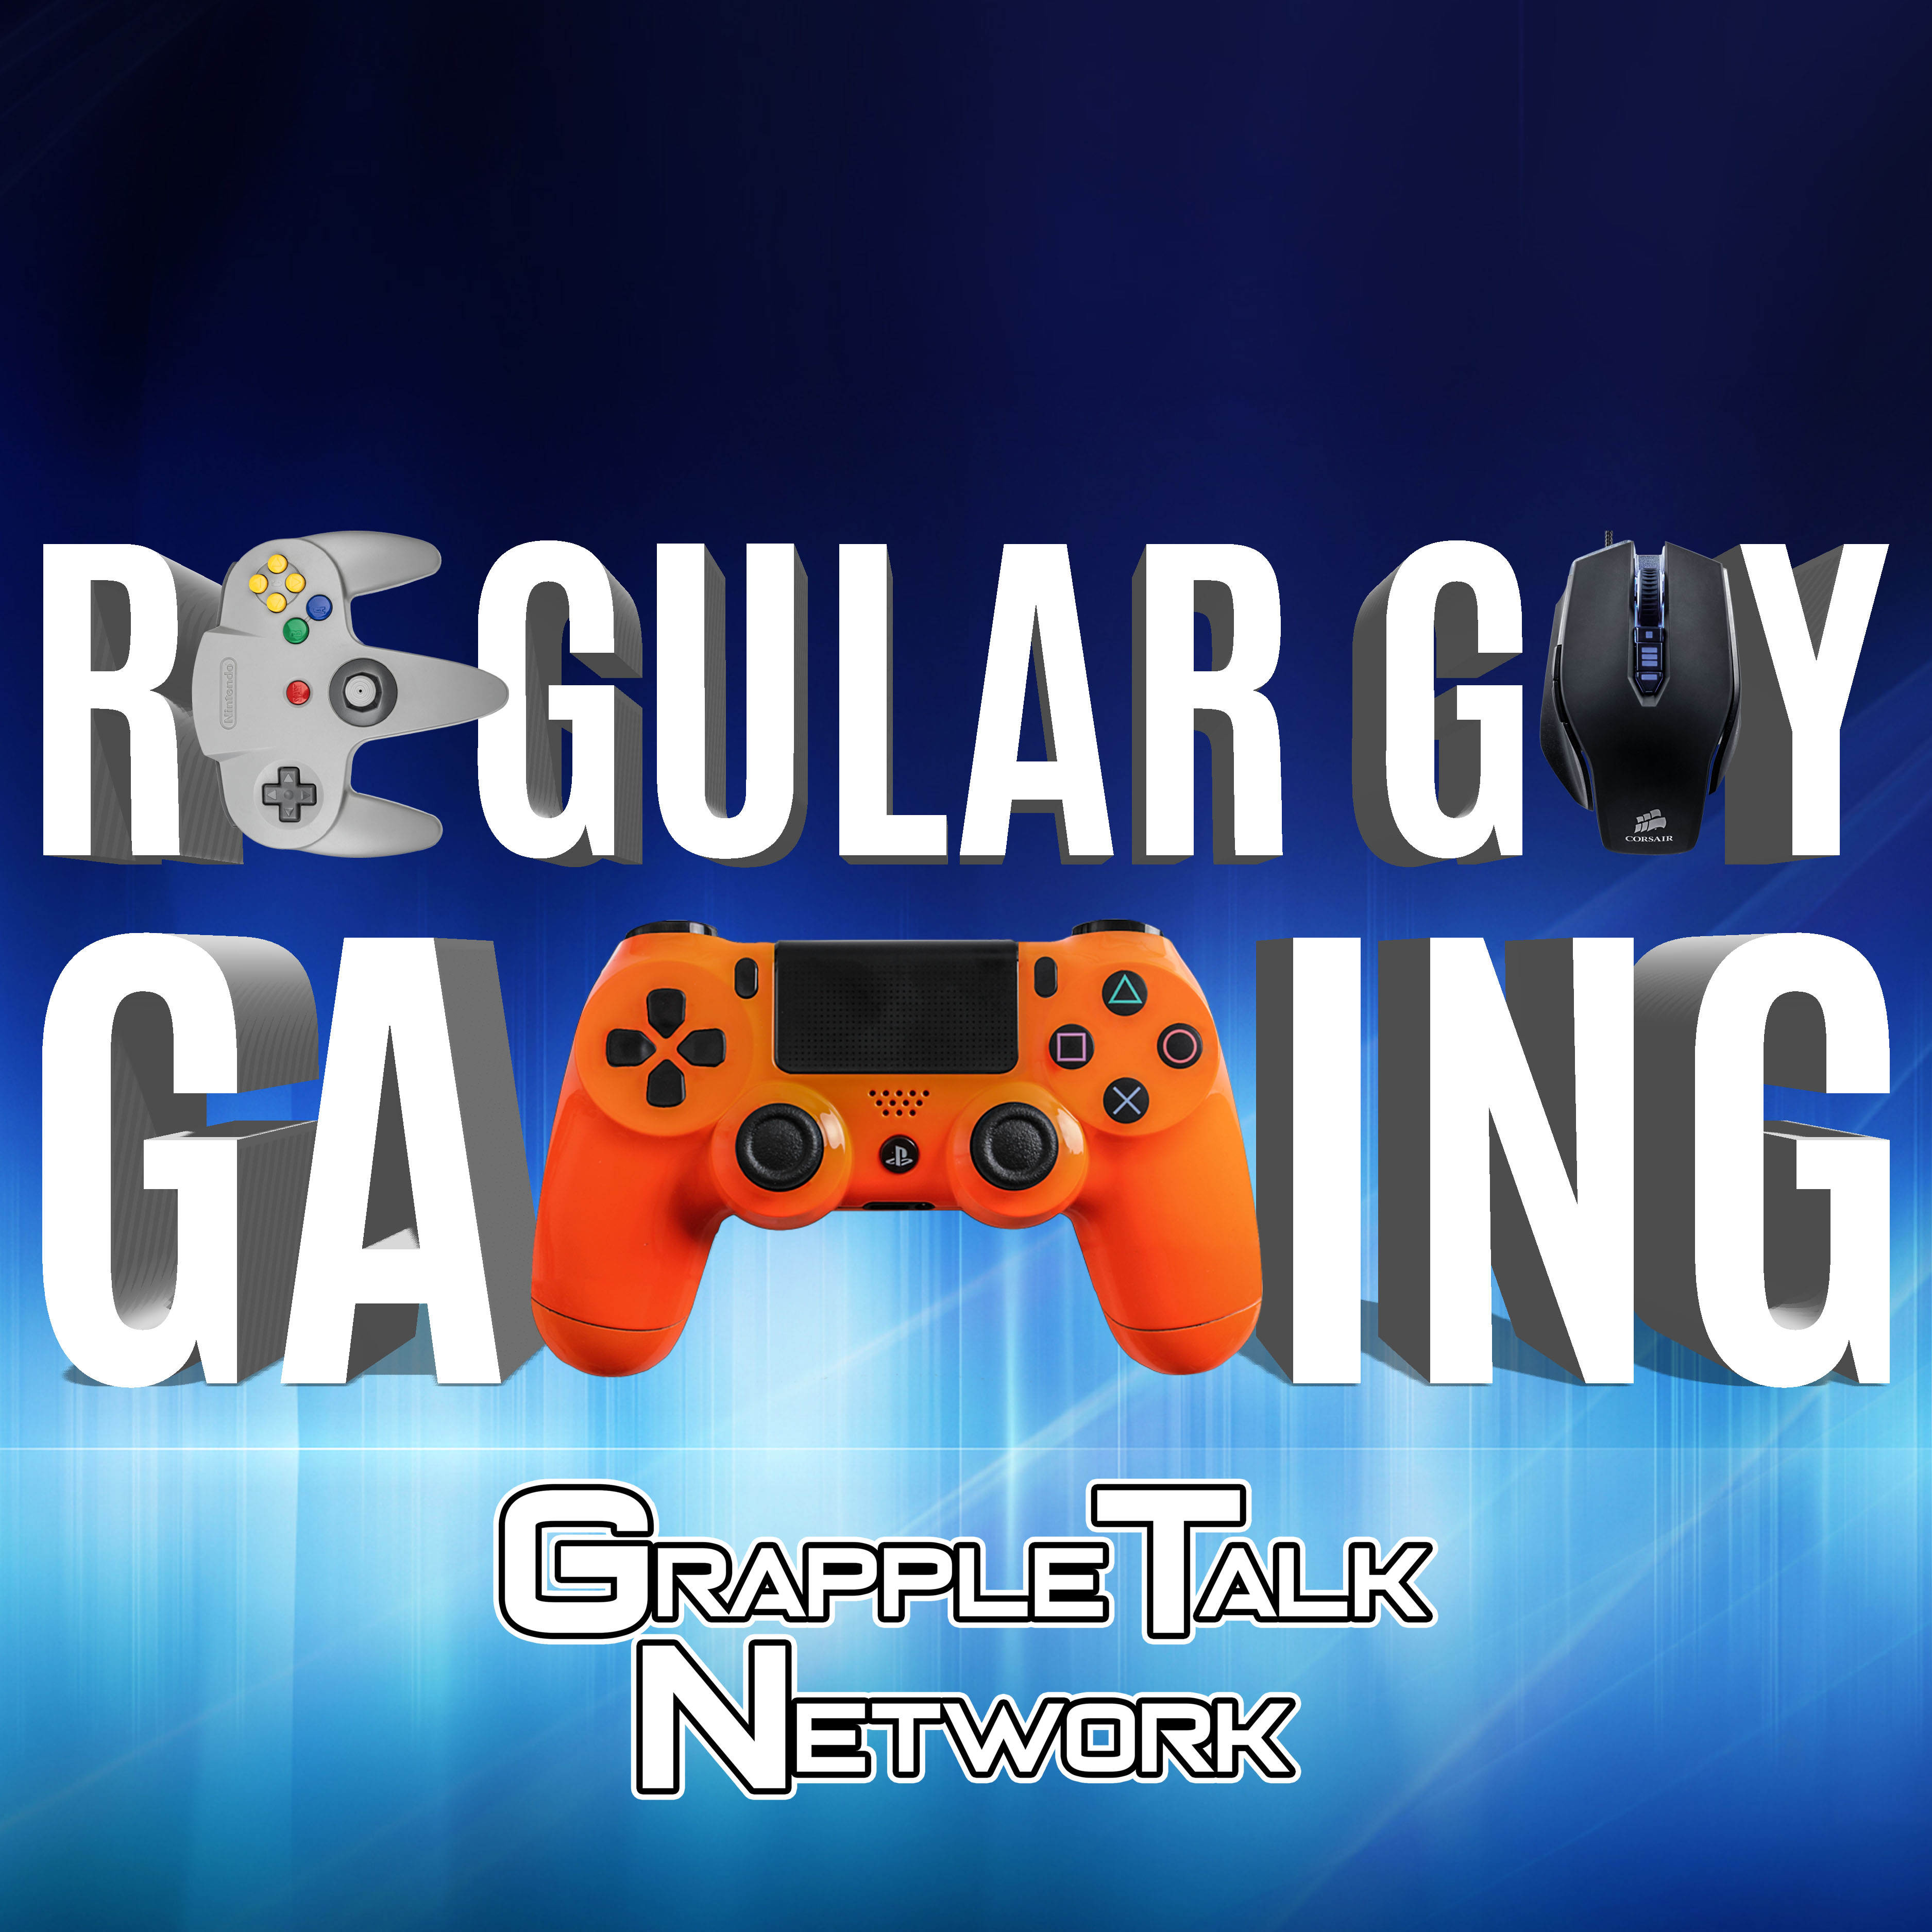 Regular Guy Gaming #26: A Quiet Place REVIEW & God of War PREVIEW